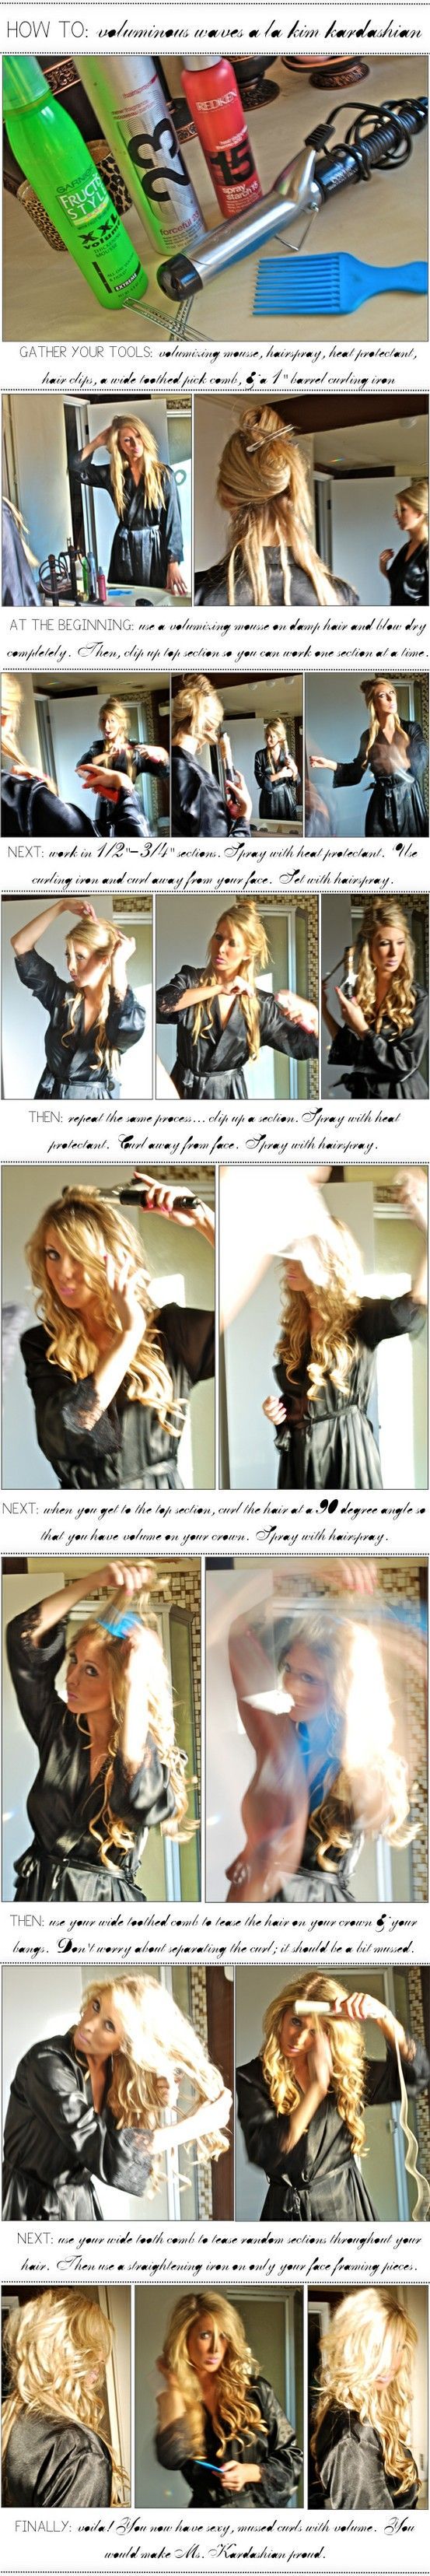 How To: Voluminous Waves Im pinning this in case I really do have the patience t